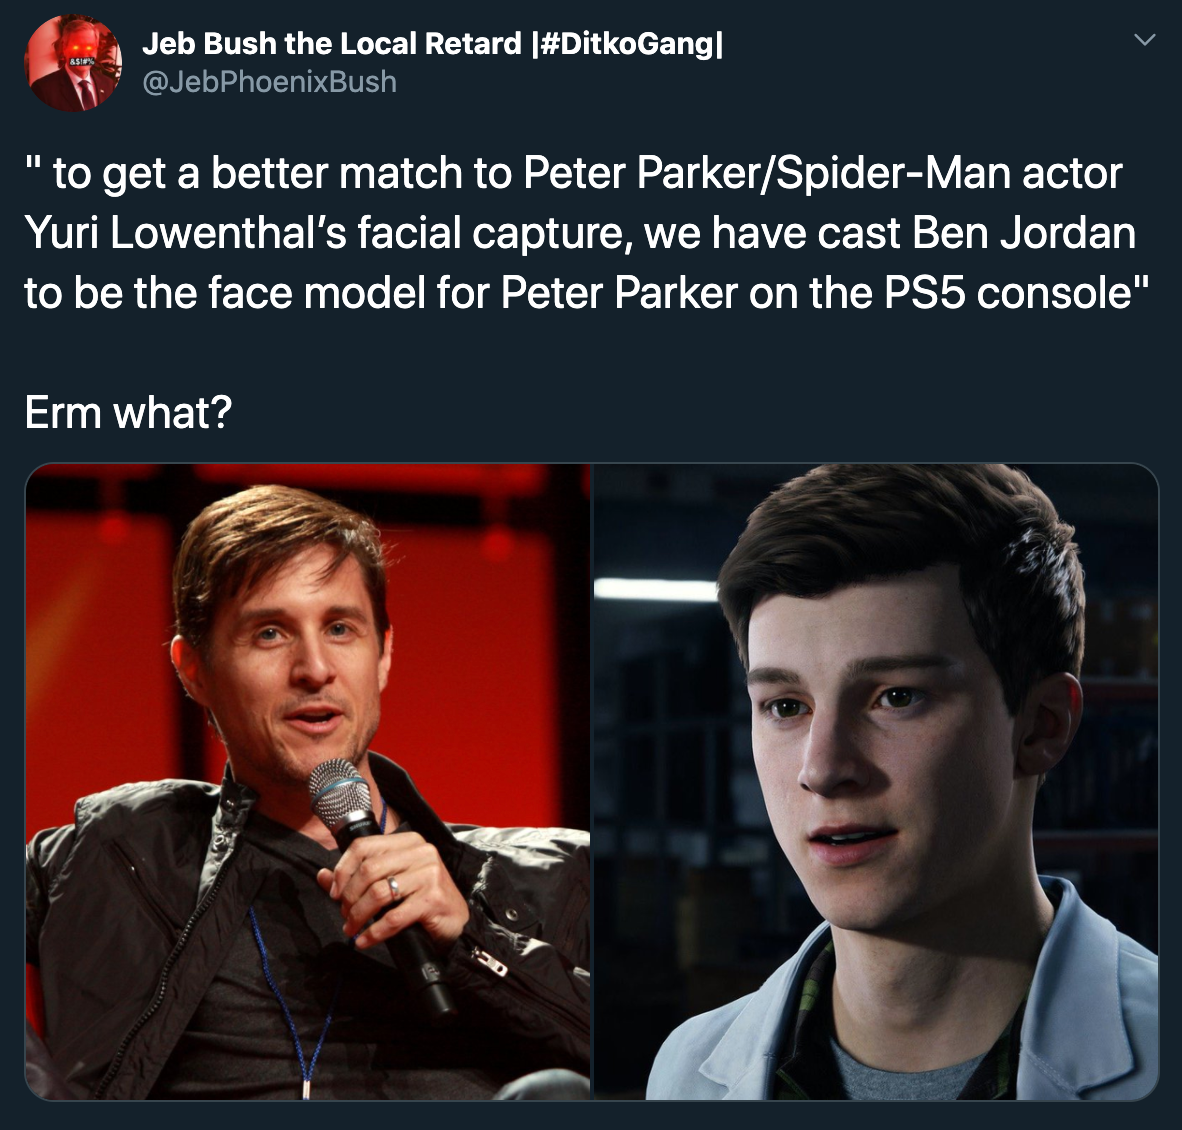 to get a better match to peter parker spider-man actor yuri lowenthal's facial capture, we have cast ben jordan to be the model for peter parker on the ps5 console. what!